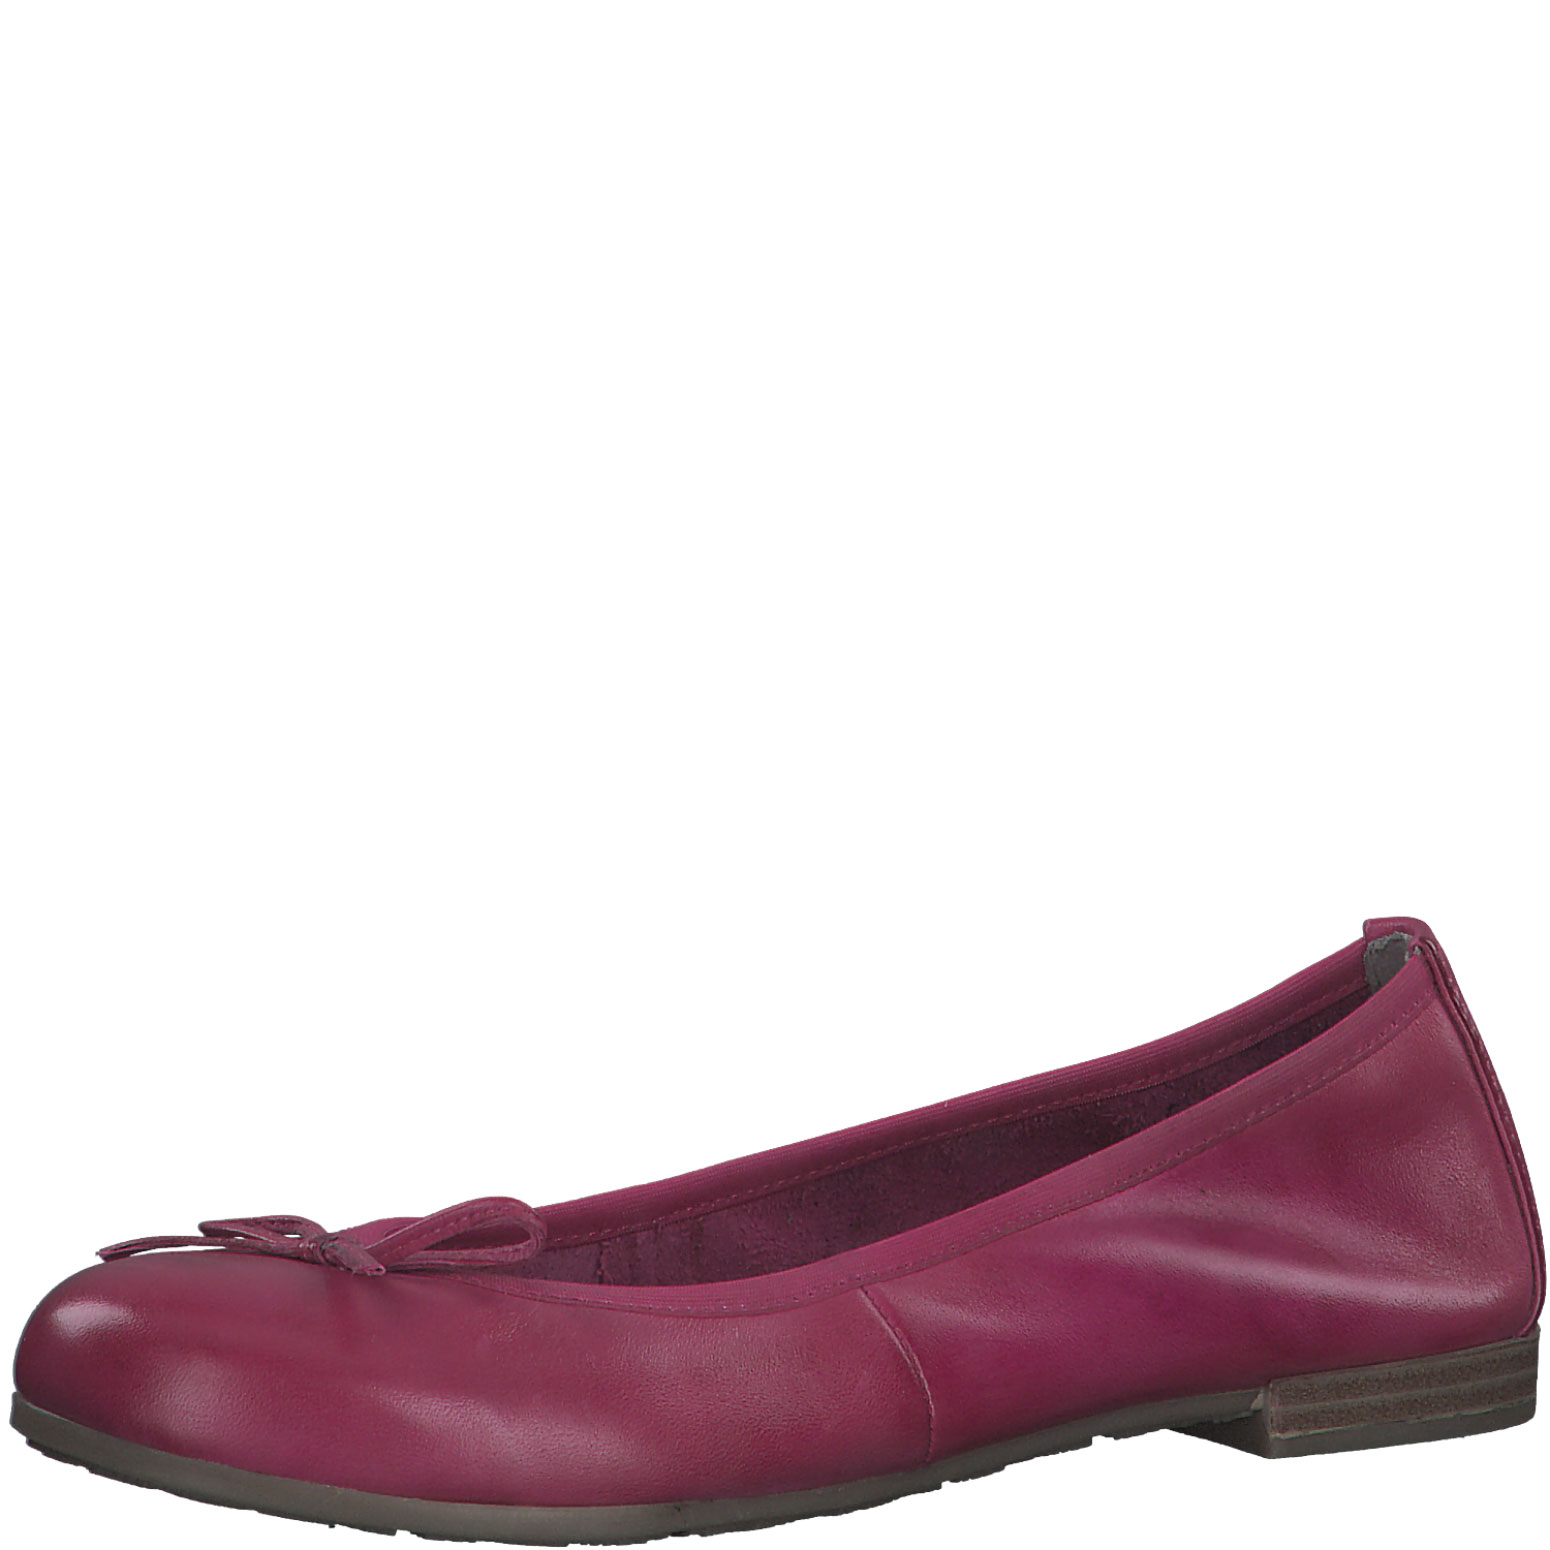 Ballerina - Pink smooth leather